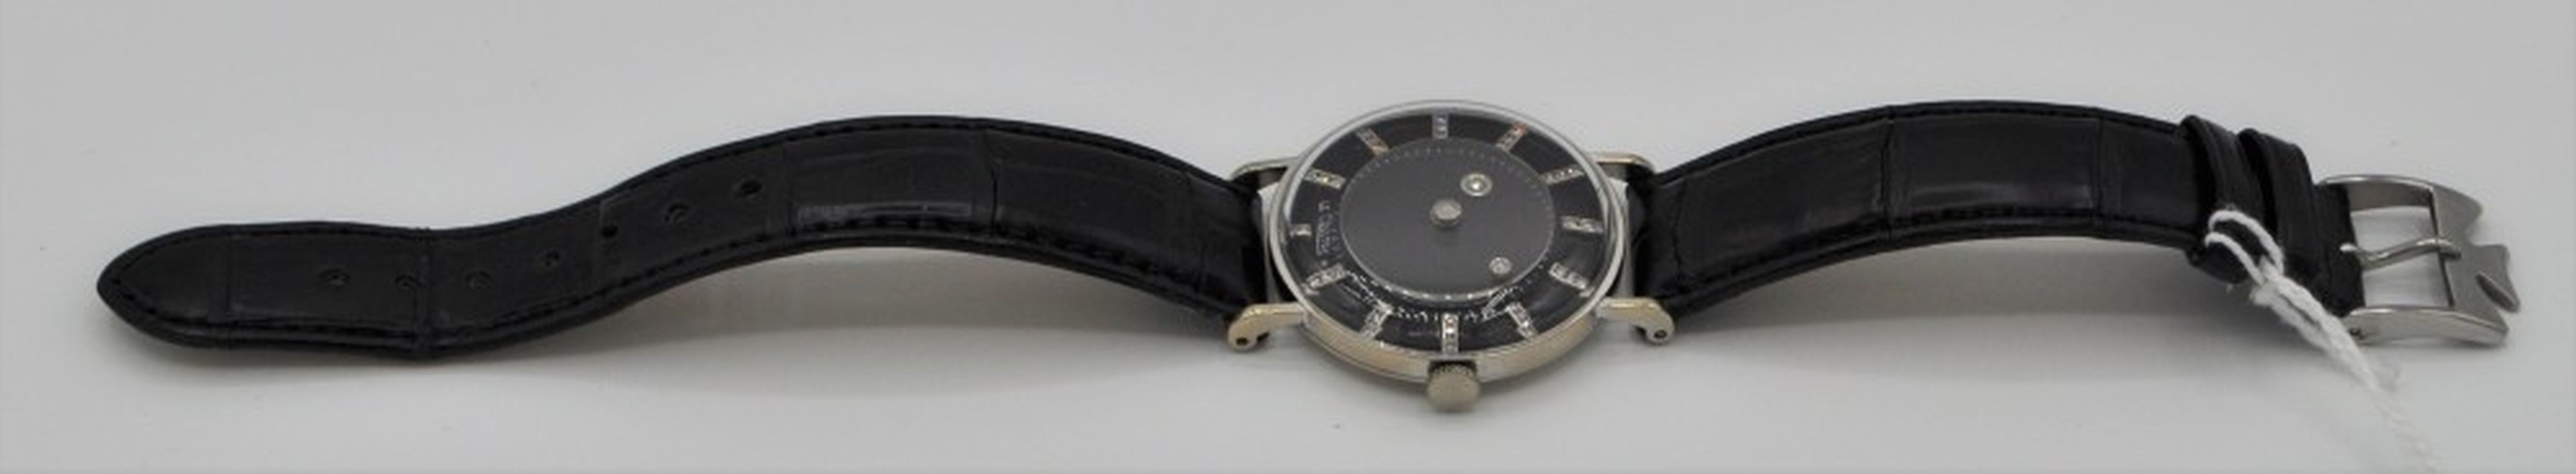 LECOULTRE AND VACHERON CONSTANTIN WRISTWATCH 1950S WITH DIAMOND MYSTERY 'GALAXY' DIAL IN 14CT - Image 6 of 7